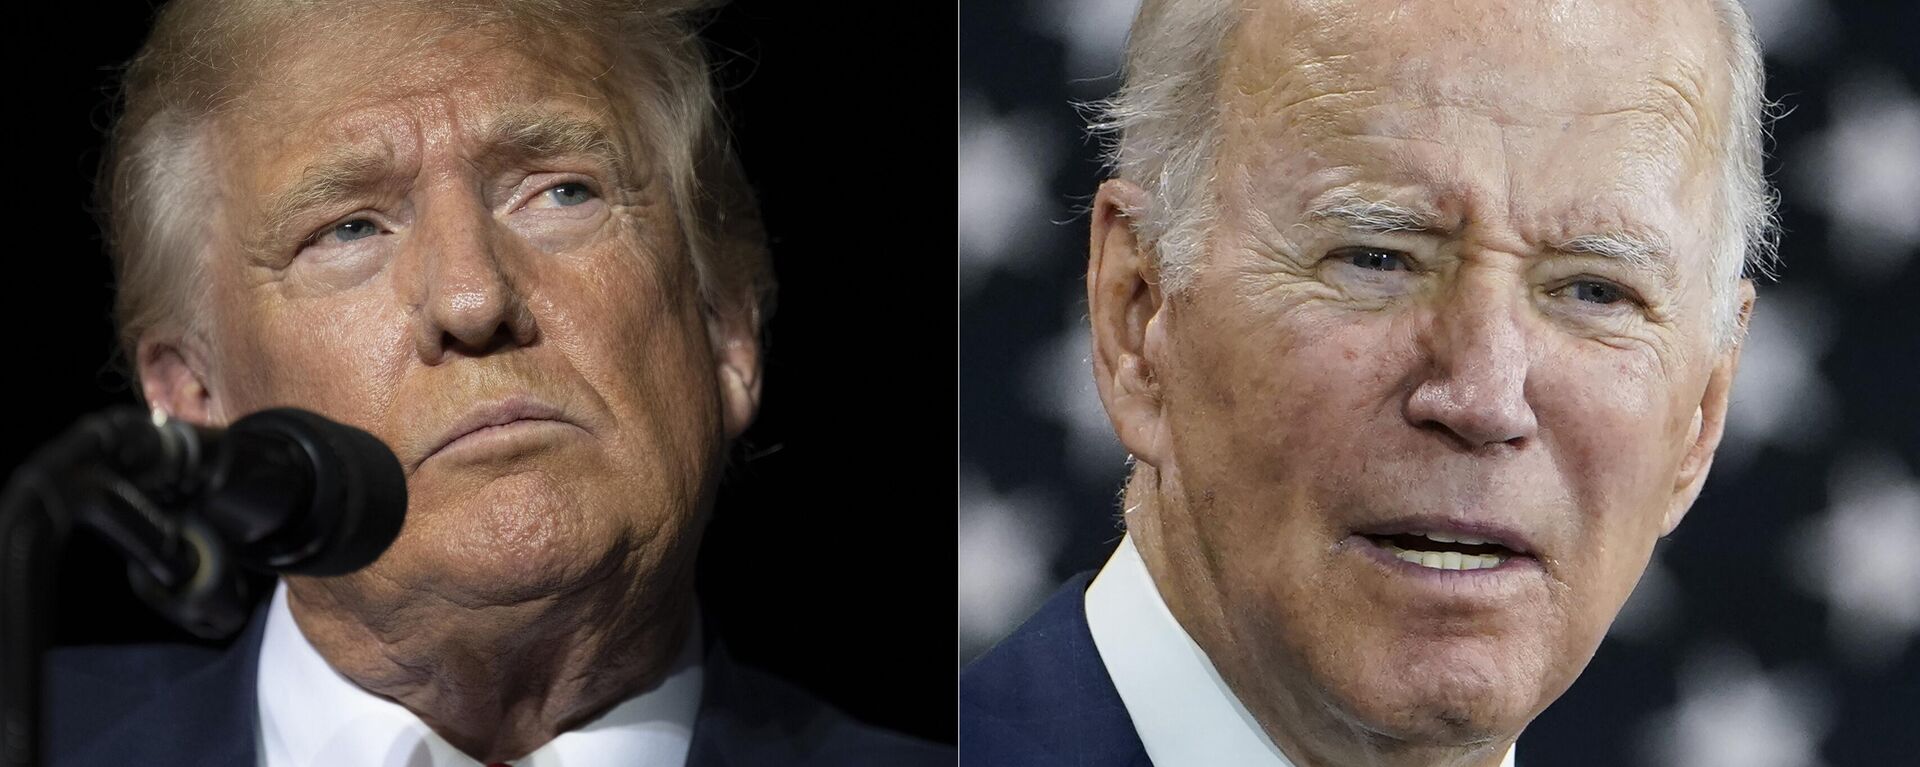 This combination of photos shows former President Donald Trump, left, and President Joe Biden, right. Biden and Trump are preparing for a possible rematch in 2024. But a new poll finds a notable lack of enthusiasm within the parties for either man as his party's leader, and a clear opening for new leadership. The poll from The Associated Press-NORC Center for Public Affairs Research finds a third of both Democrats and Republicans are unsure of who they want leading their party.  - Sputnik International, 1920, 28.04.2023